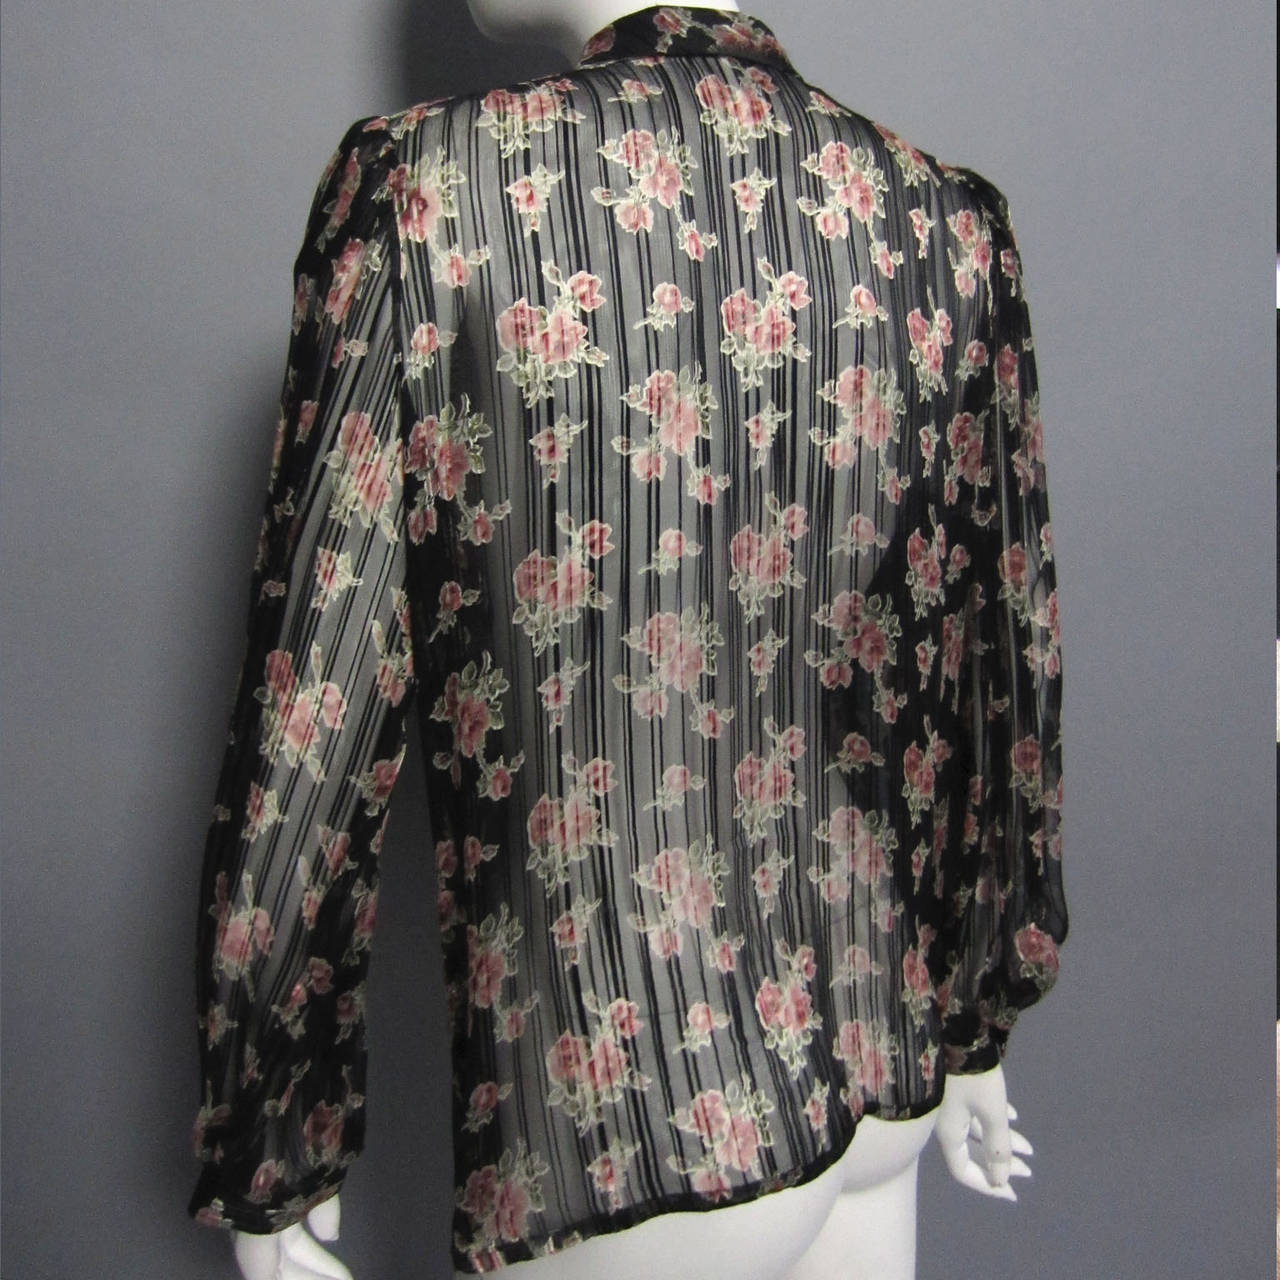 EMANUEL UNGARO Silk Floral Print Blouse In Excellent Condition For Sale In New York, NY